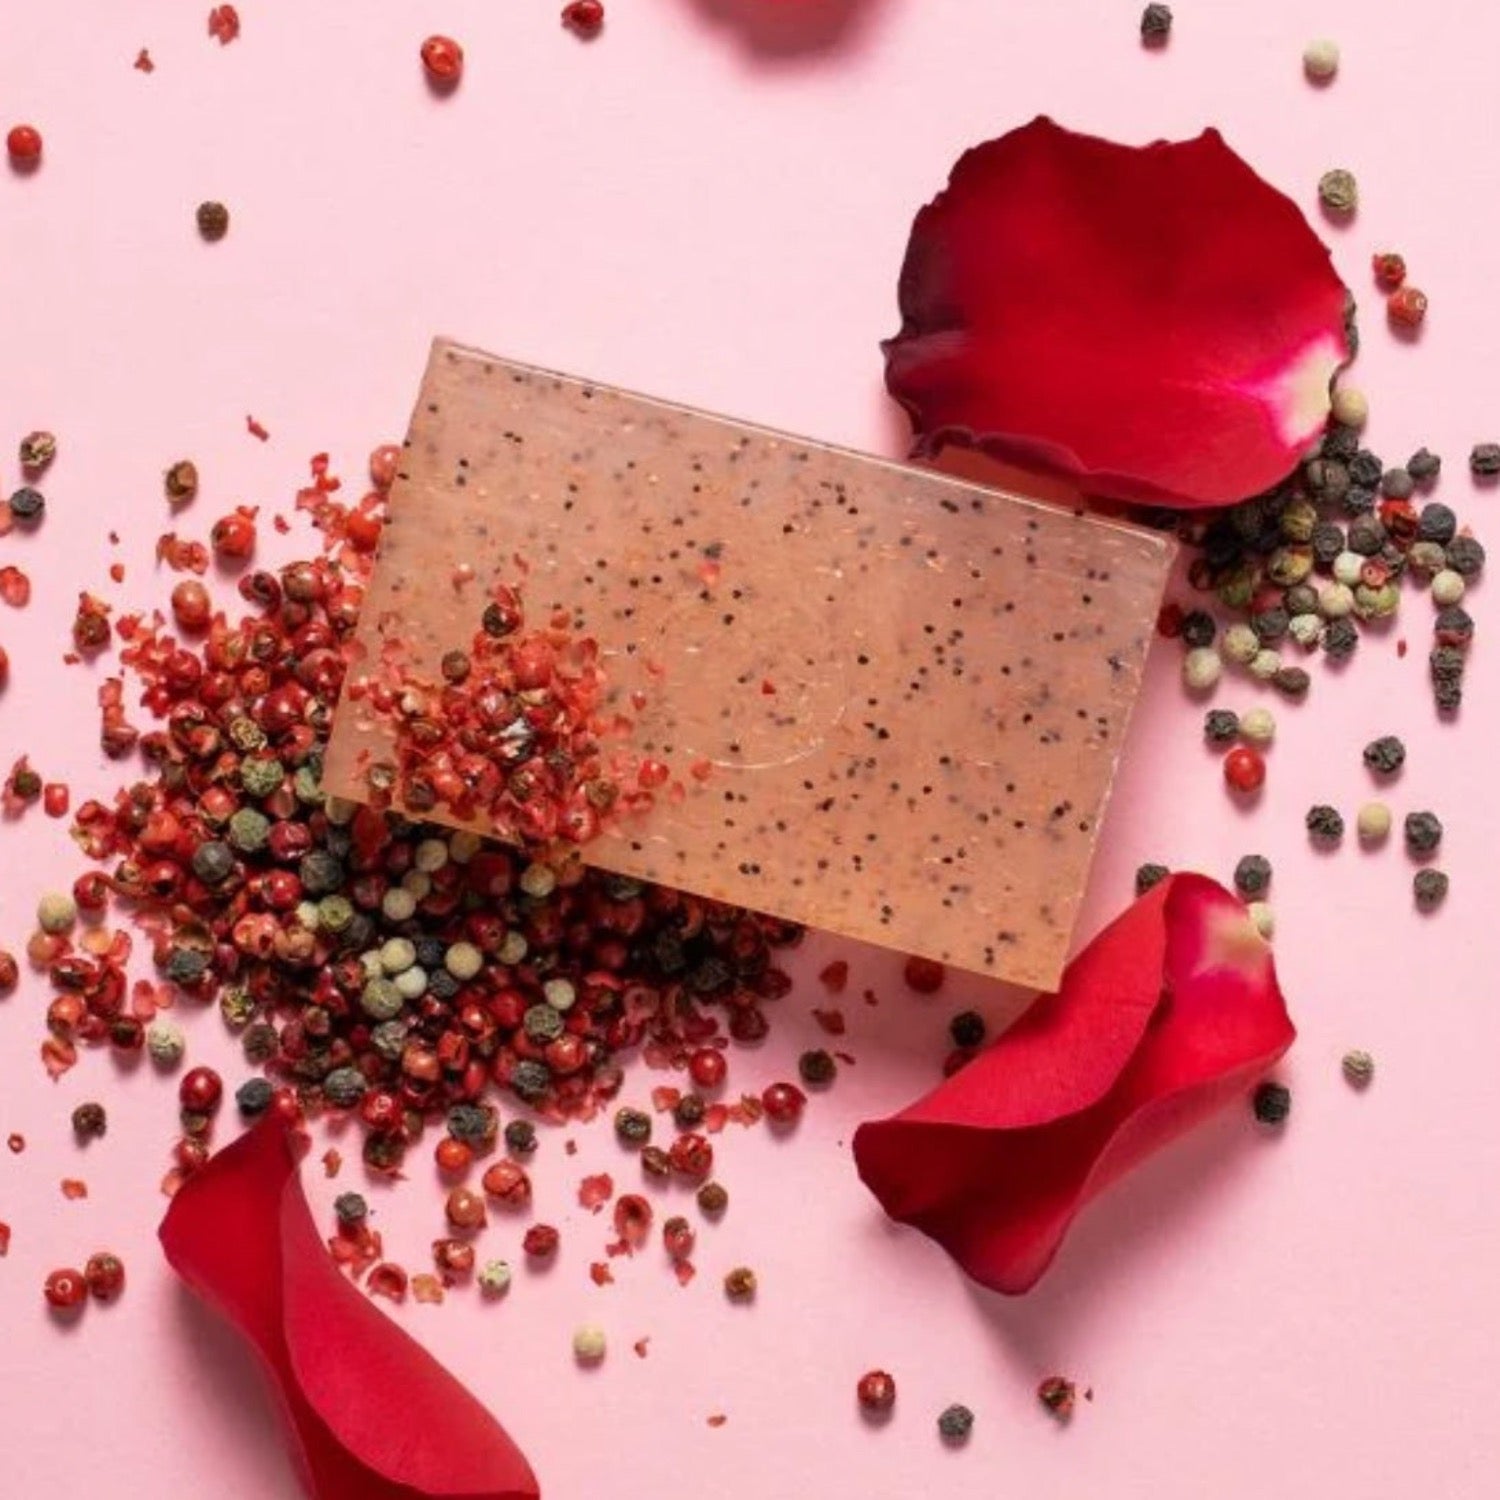 Apivita Natural Soap with Rose Black Pepper with rose extract and organic rose oil hydrate and invigorate, while black pepper essential oil brings invigorating heat and improved muscular tone.